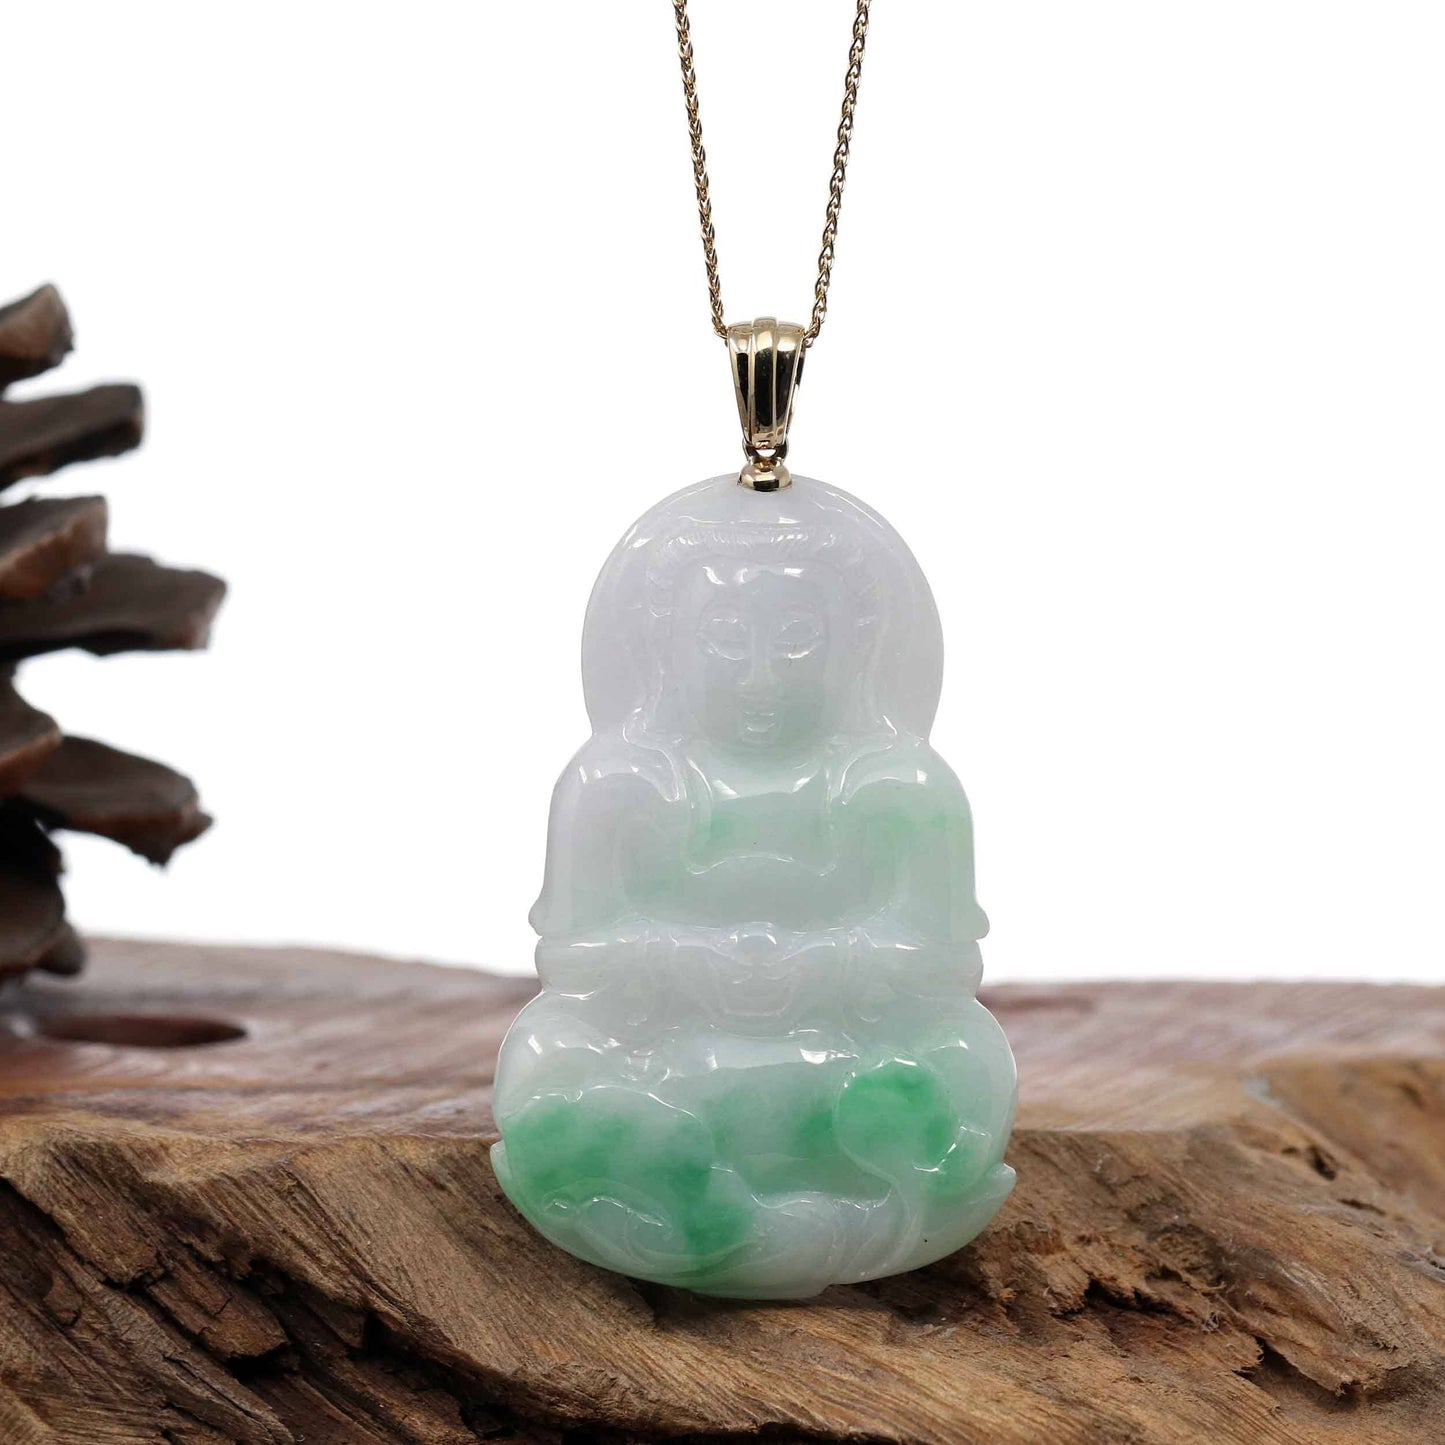 RealJade® Co. Jade Guanyin Pendant Necklace Pendant Only   "Goddess of Compassion" 14k Yellow Gold Genuine Burmese Jadeite Jade Guanyin Necklace With Good Luck Design